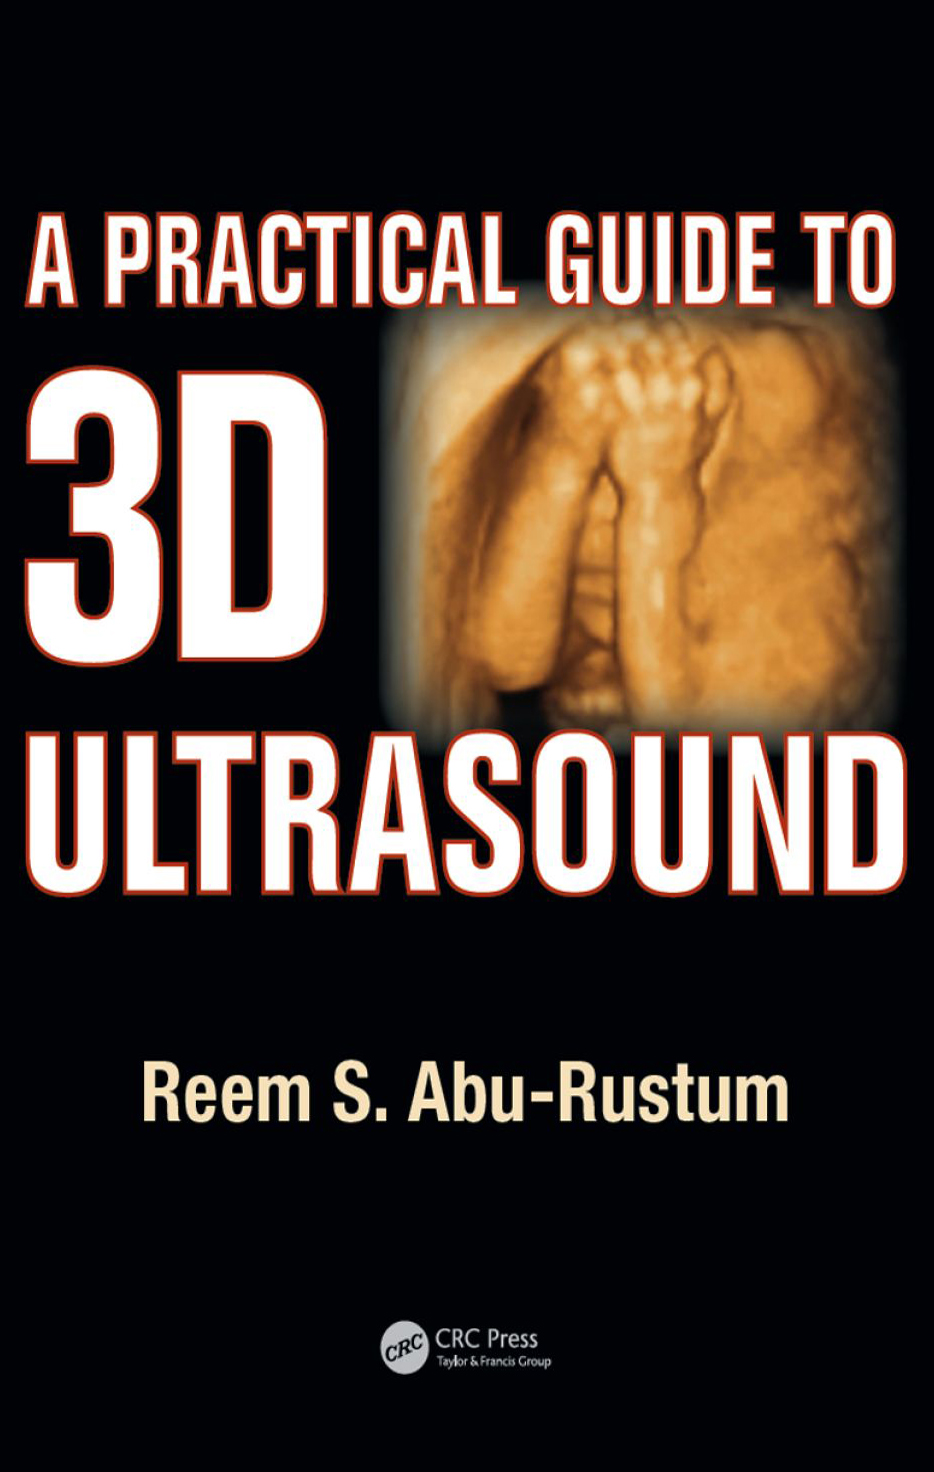 [PDF] A practical Guide to 3D ultrasound